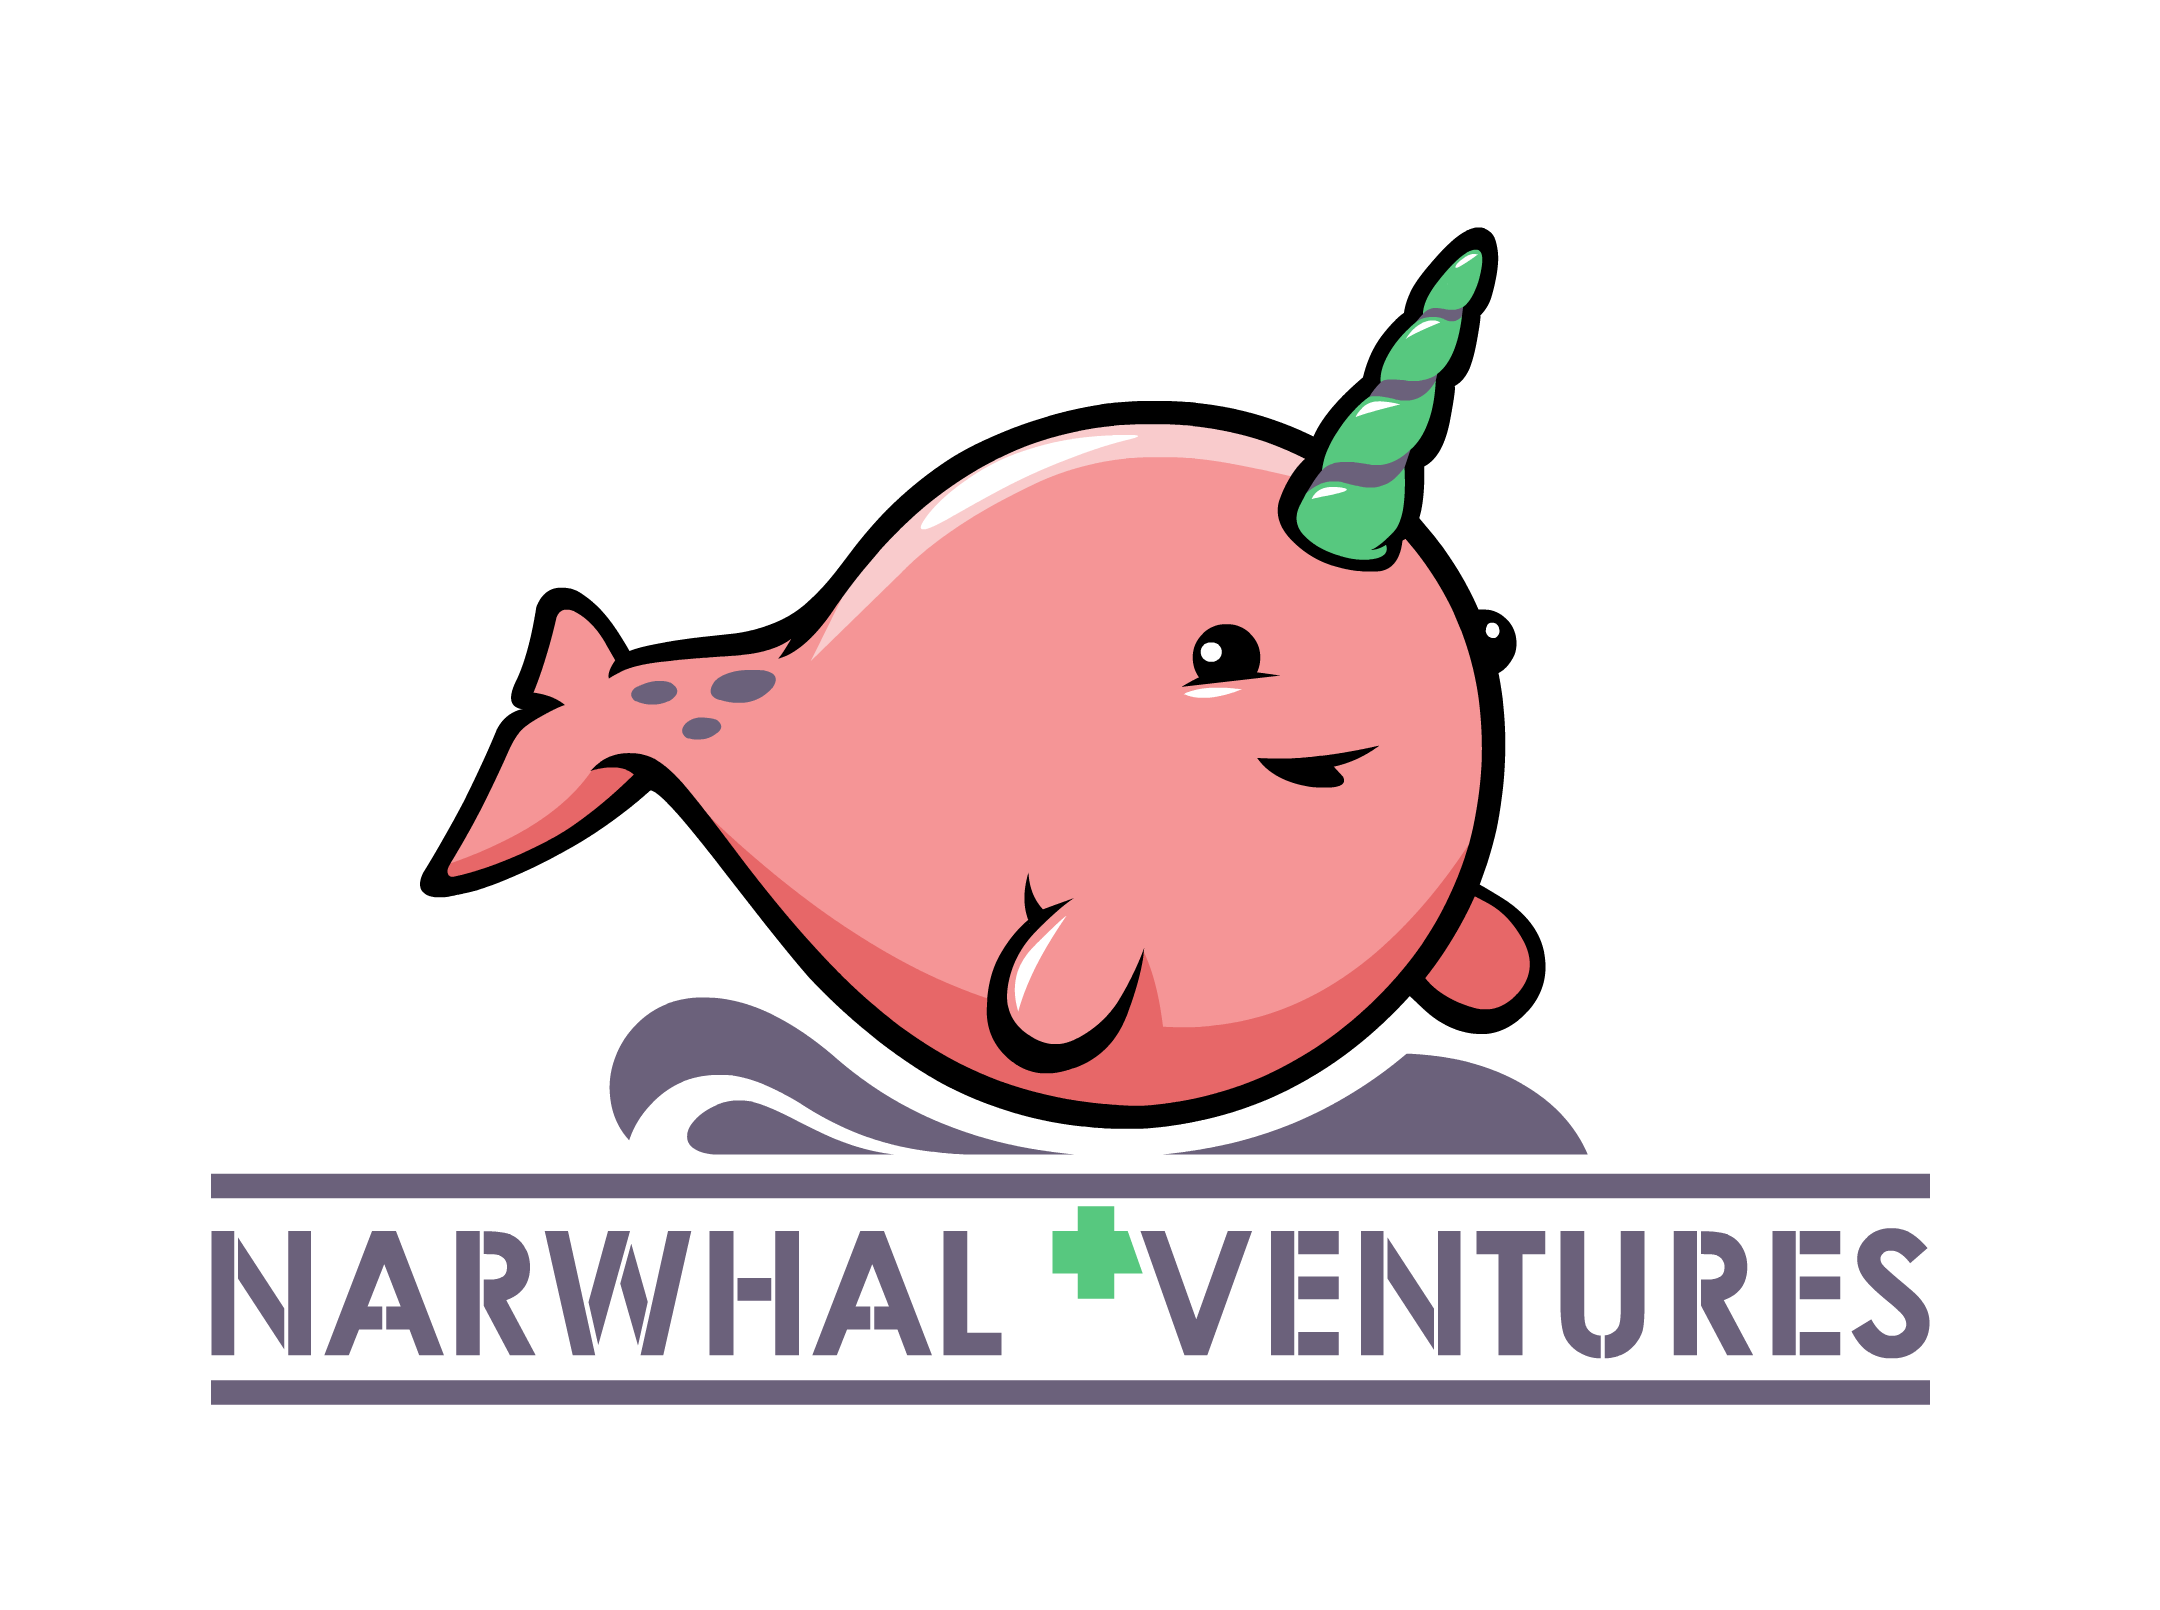 Narwhal Ventures